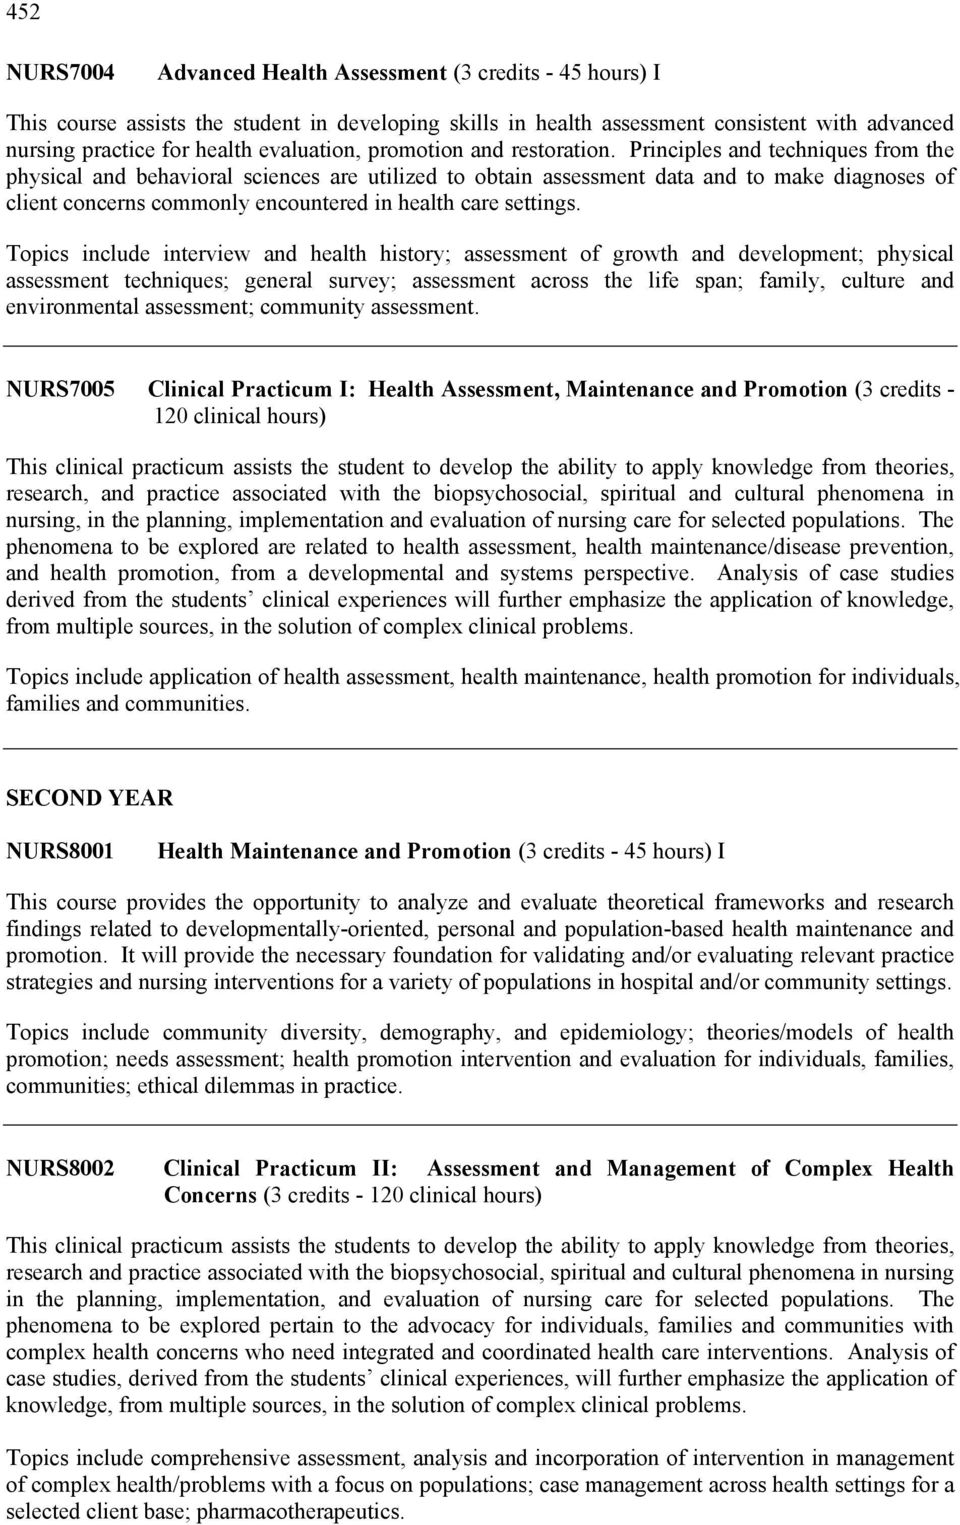 Principles and techniques from the physical and behavioral sciences are utilized to obtain assessment data and to make diagnoses of client concerns commonly encountered in health care settings.